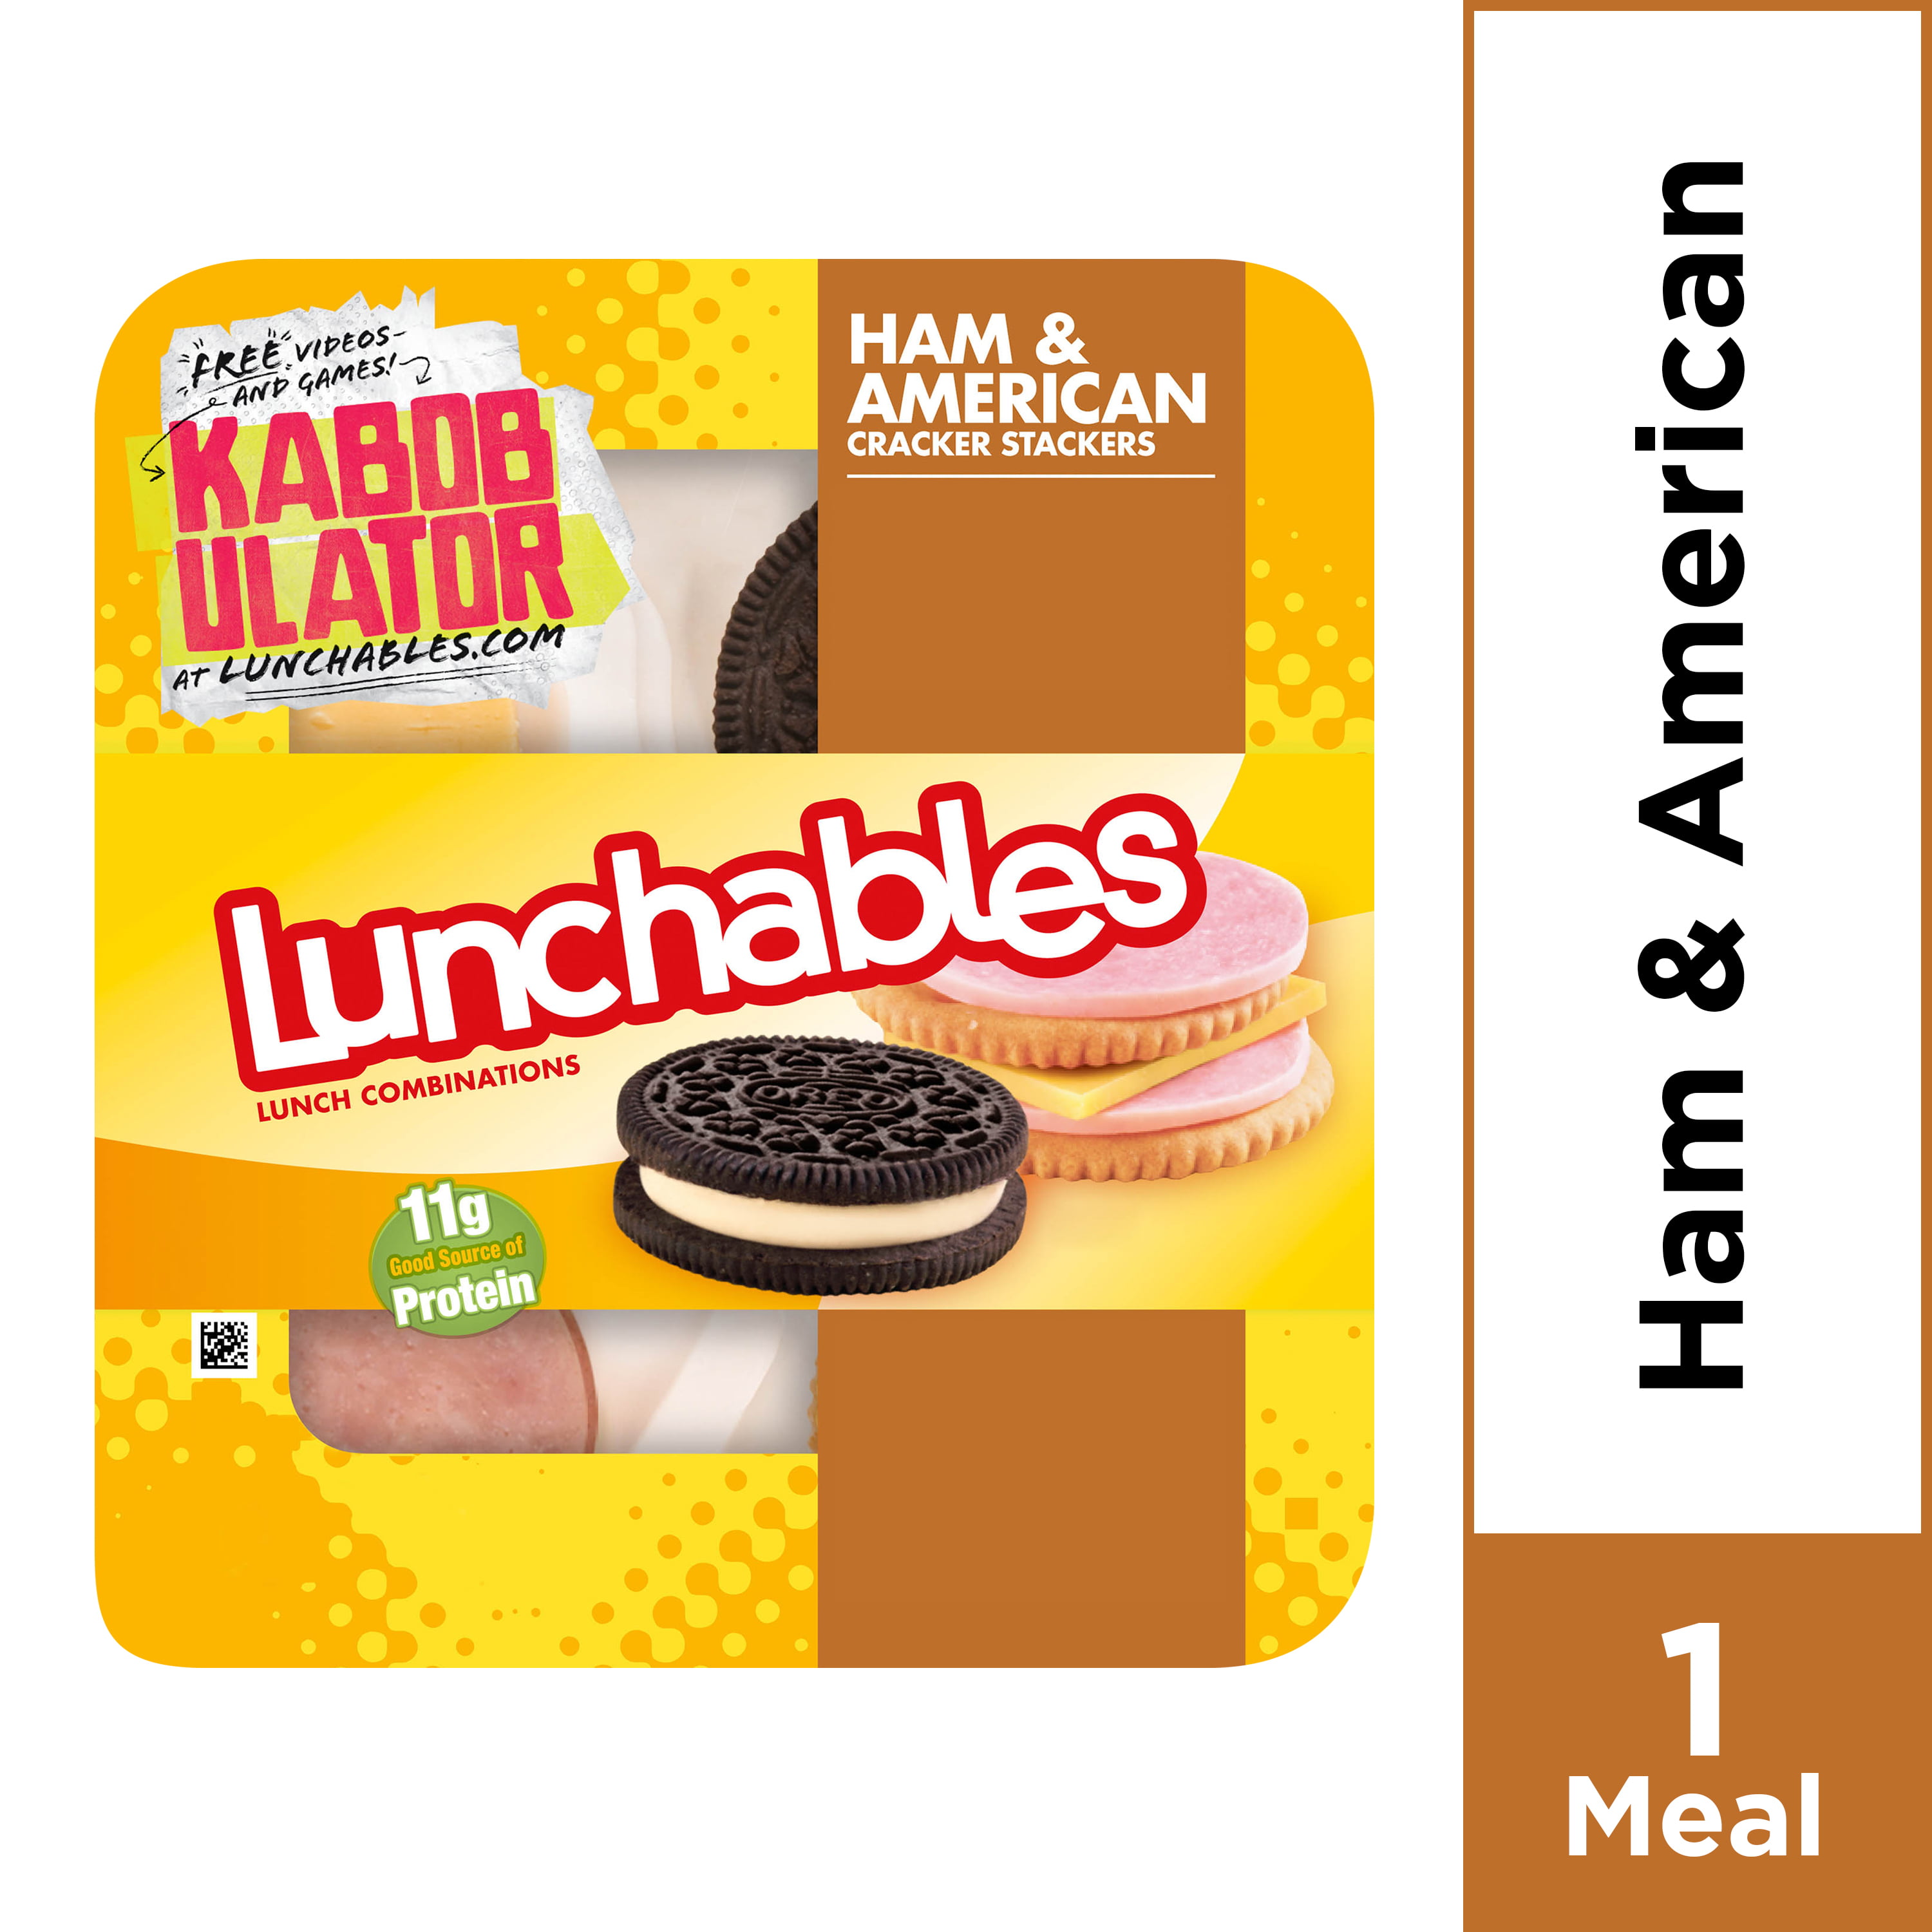 Lunchables Lunch Combinations Ham & American Cracker Stackers, 3.4 oz